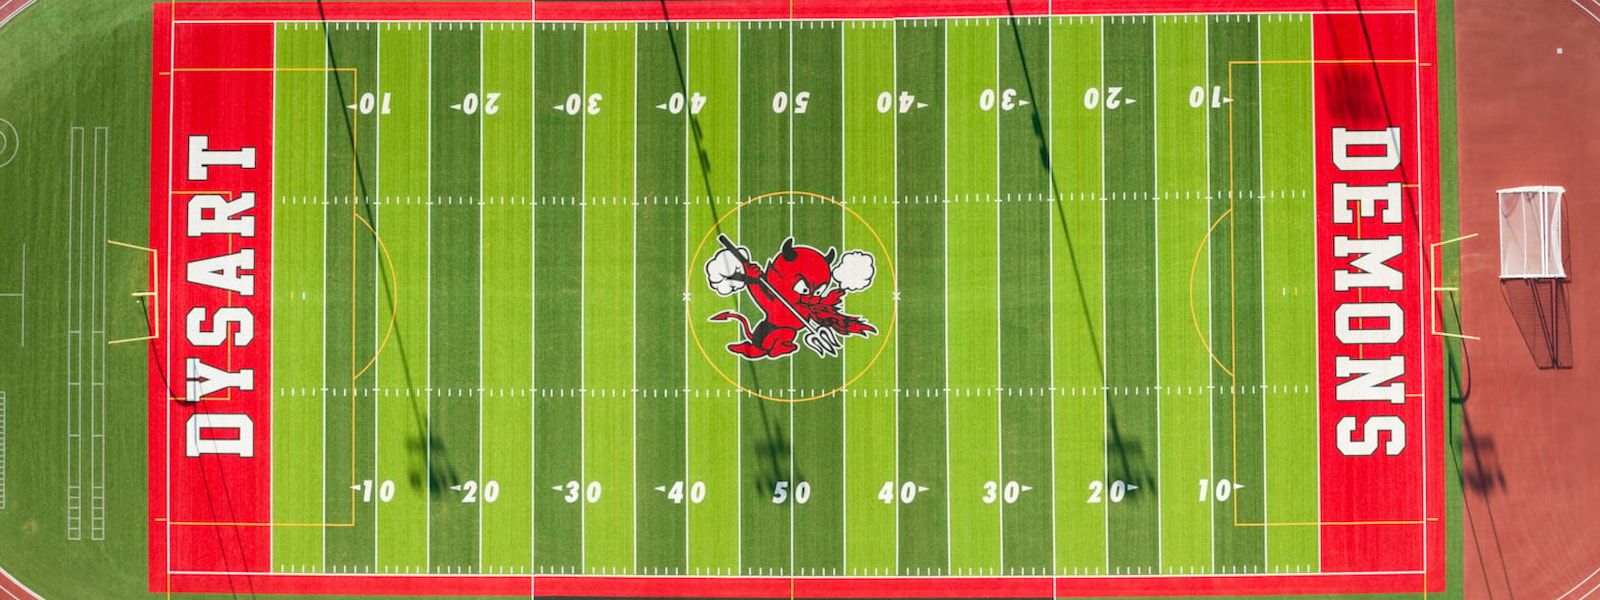 aerial view of the new football field